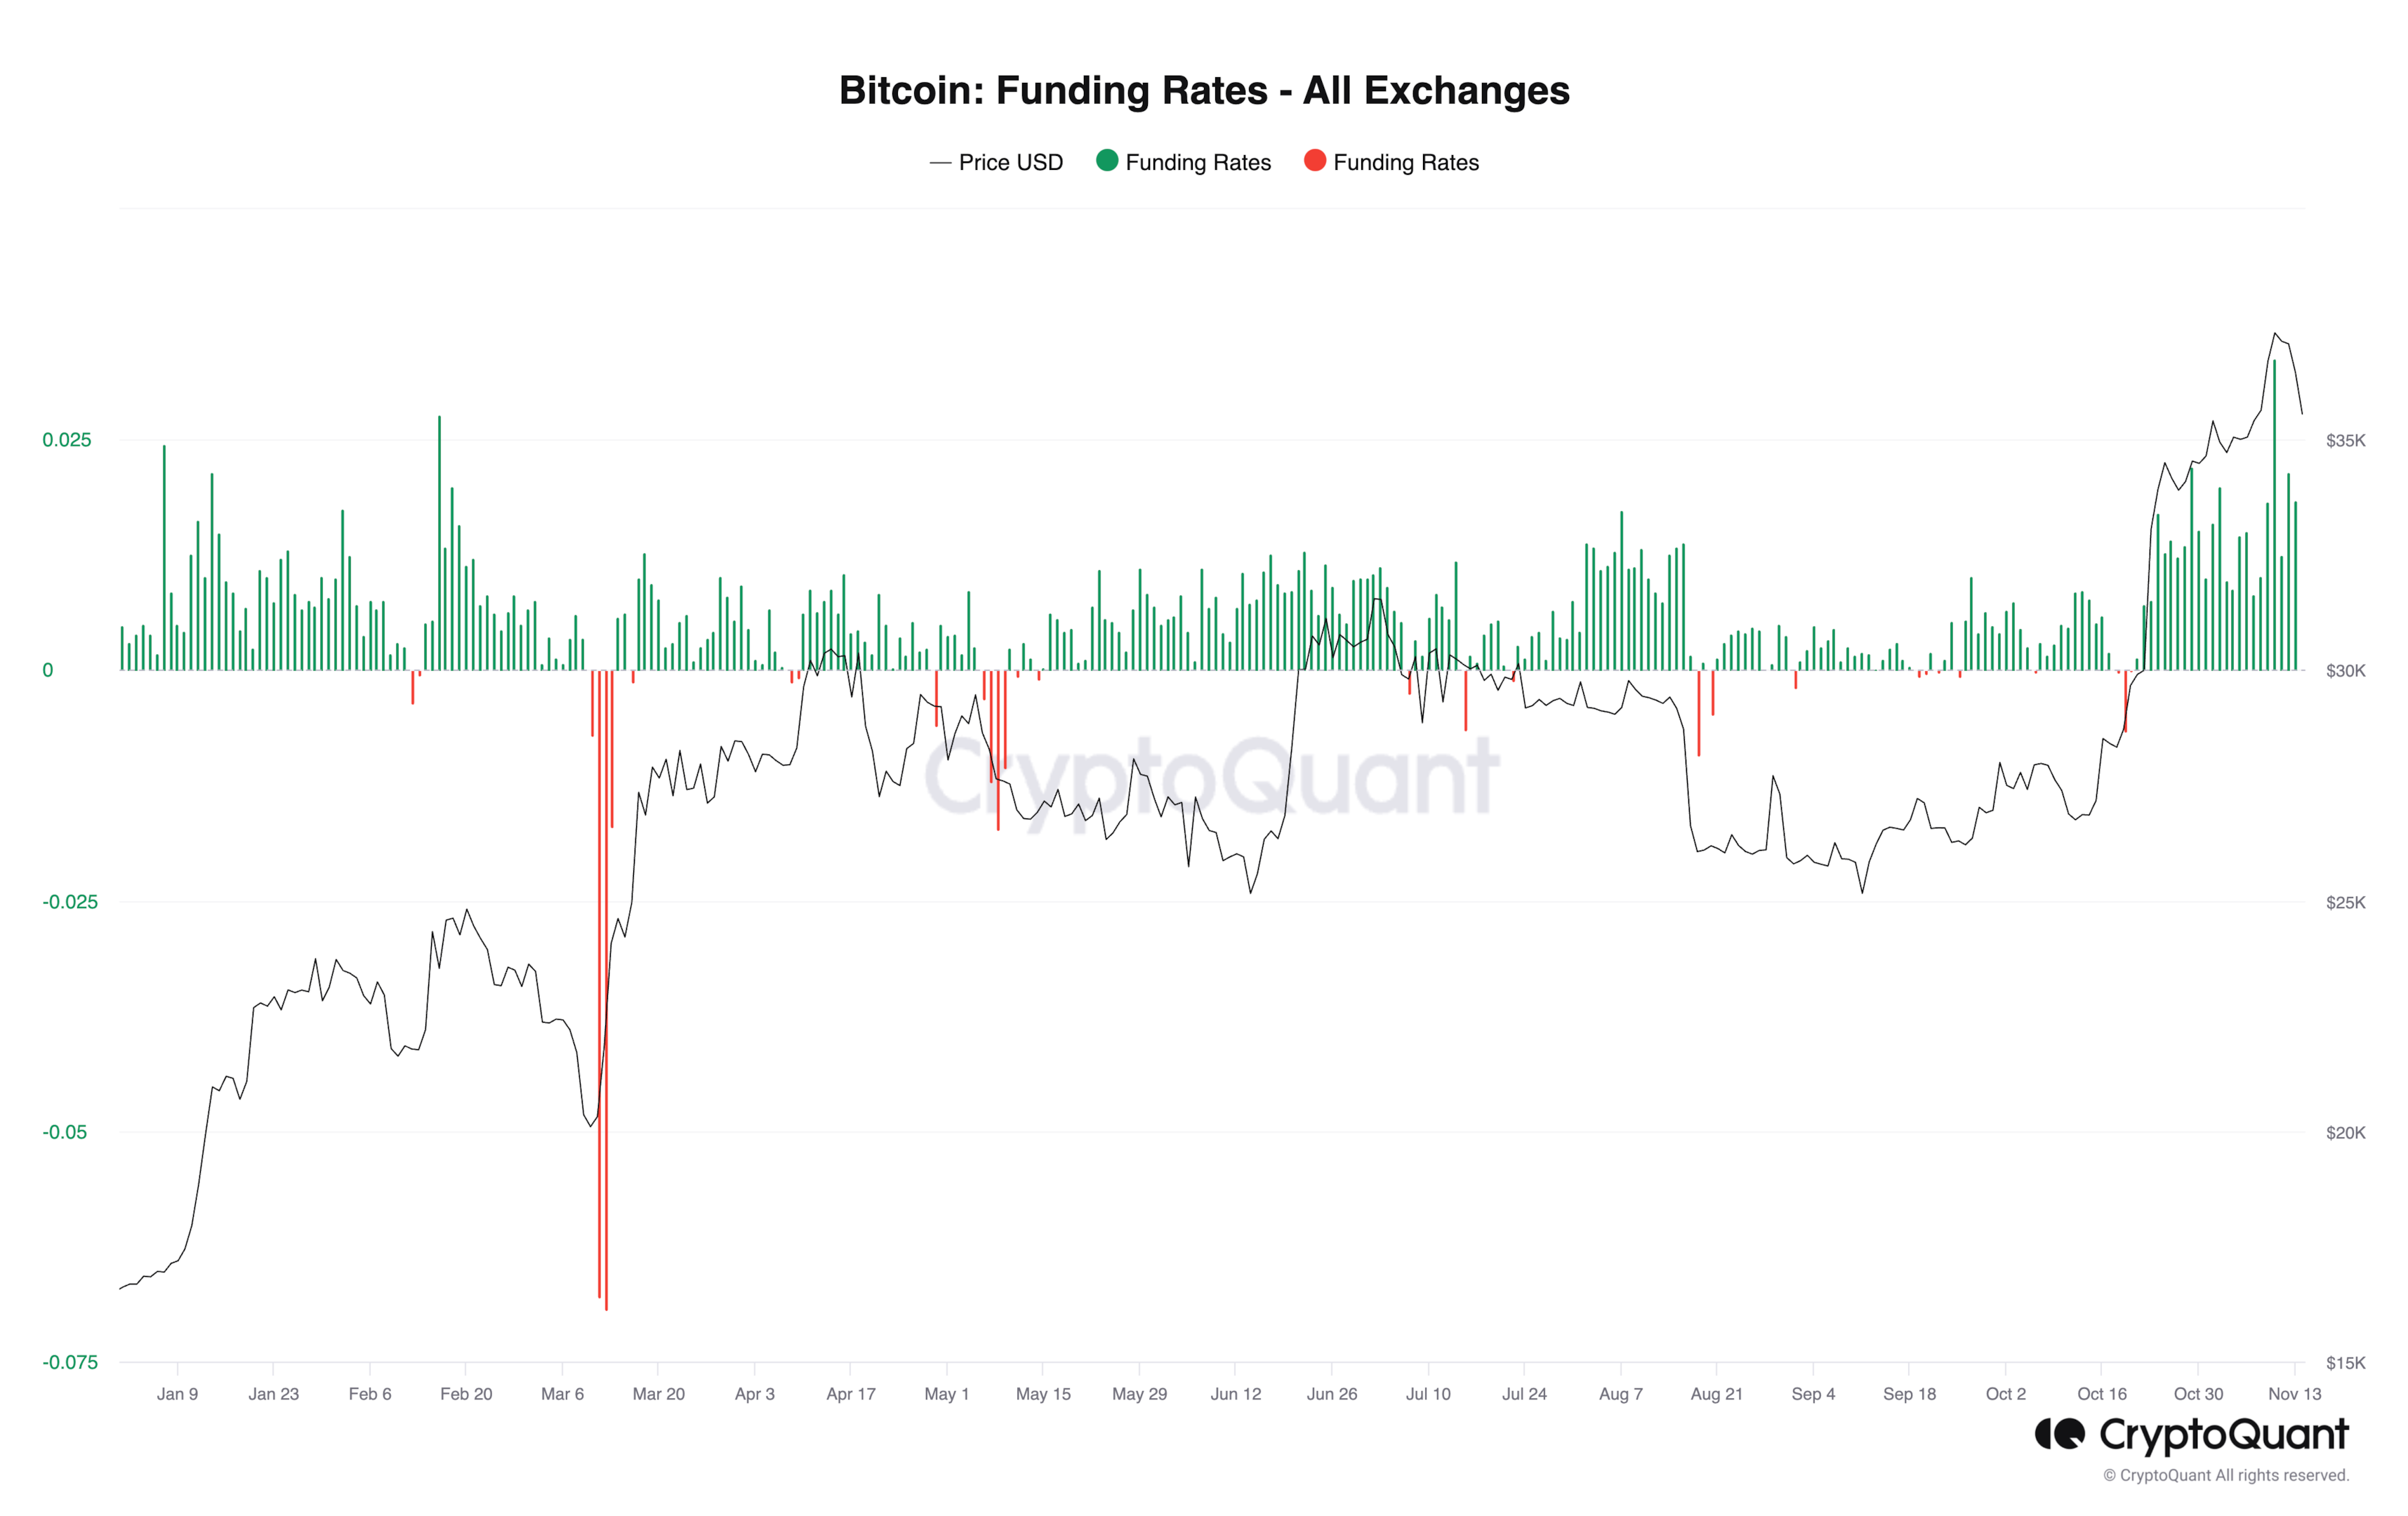 Bitcoin Funding Rate - All Exchanges. Source: CryptoQuant